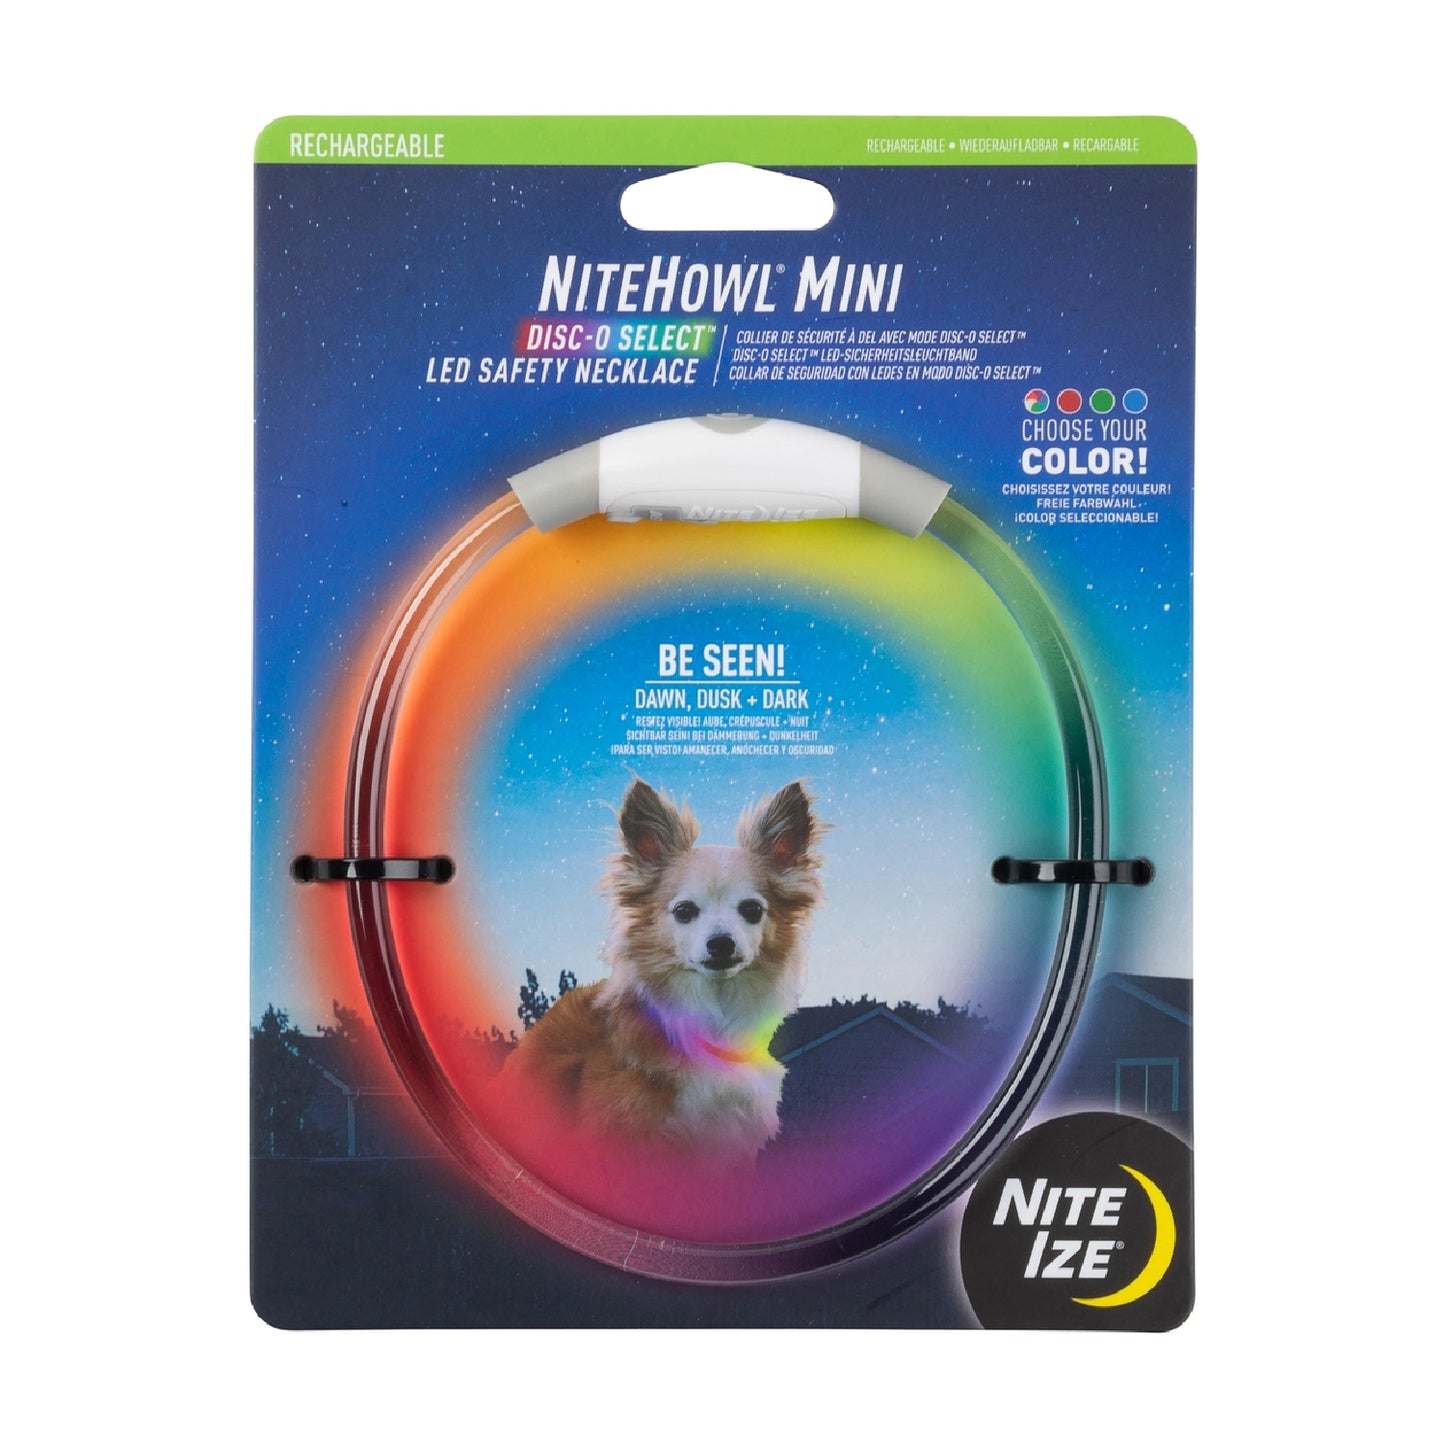 NiteHowl Mini Rechargeable LED Safety Necklace